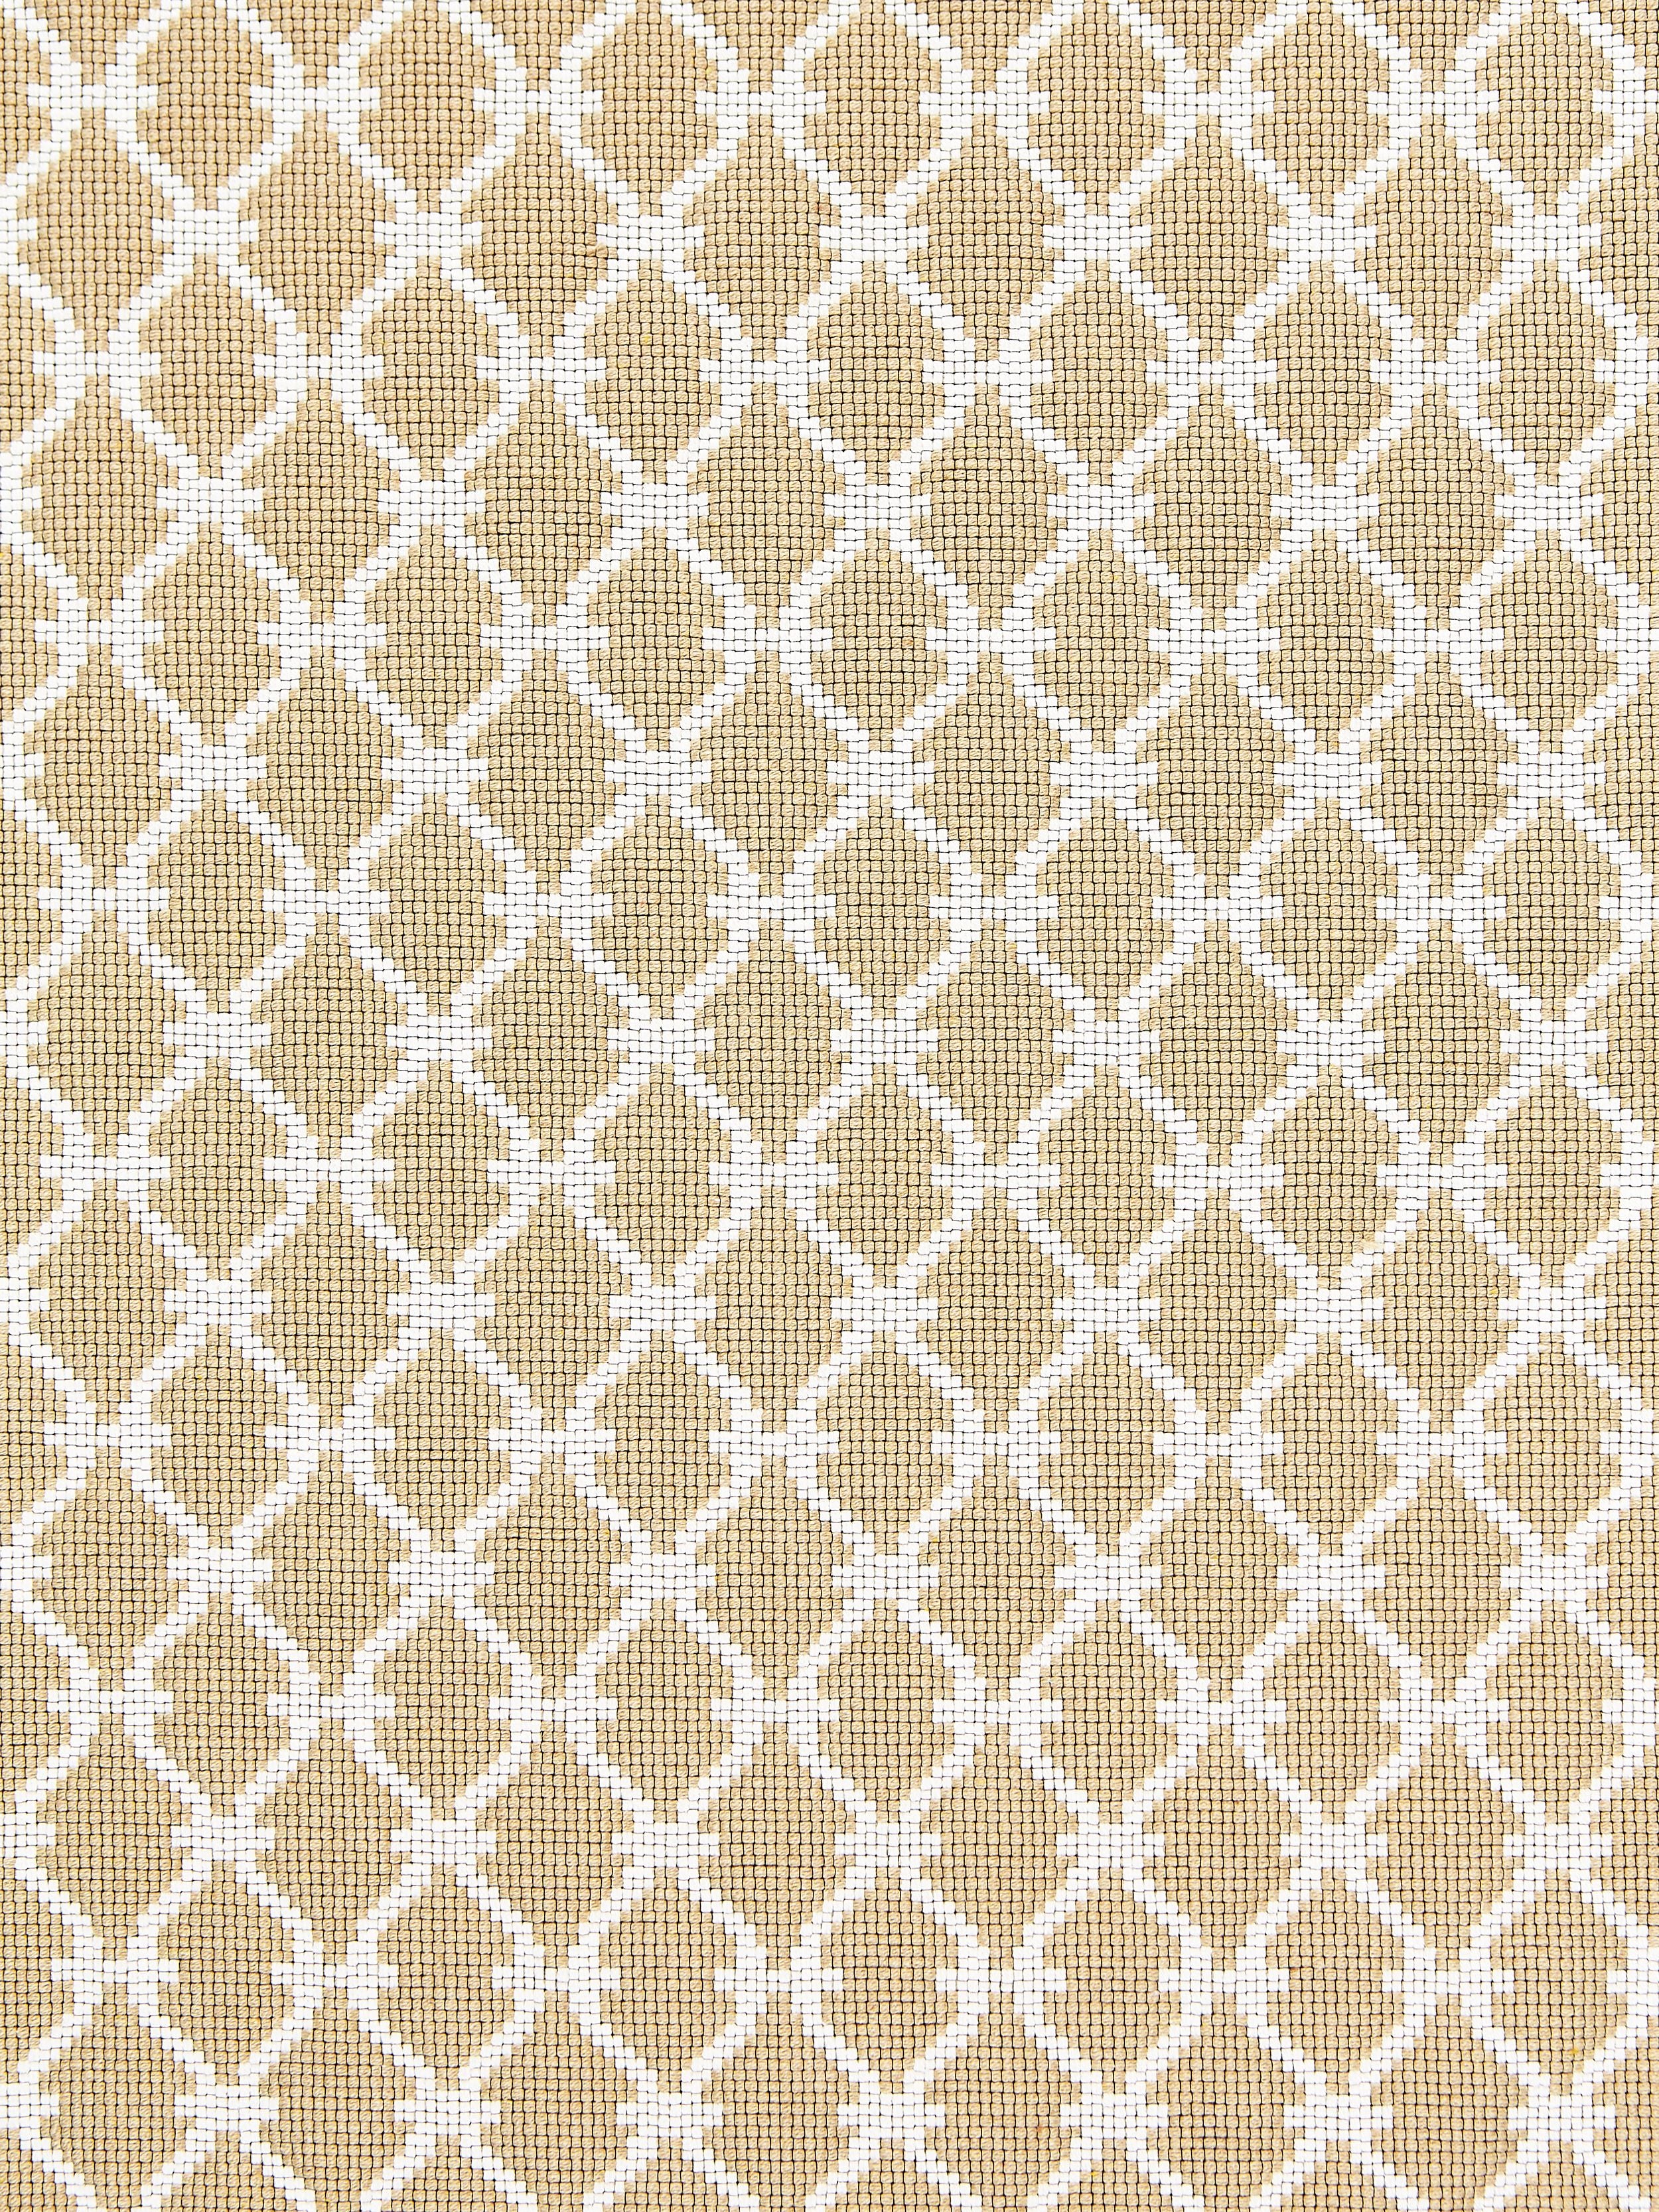 Trellis Weave fabric in sand color - pattern number SC 000127009 - by Scalamandre in the Scalamandre Fabrics Book 1 collection